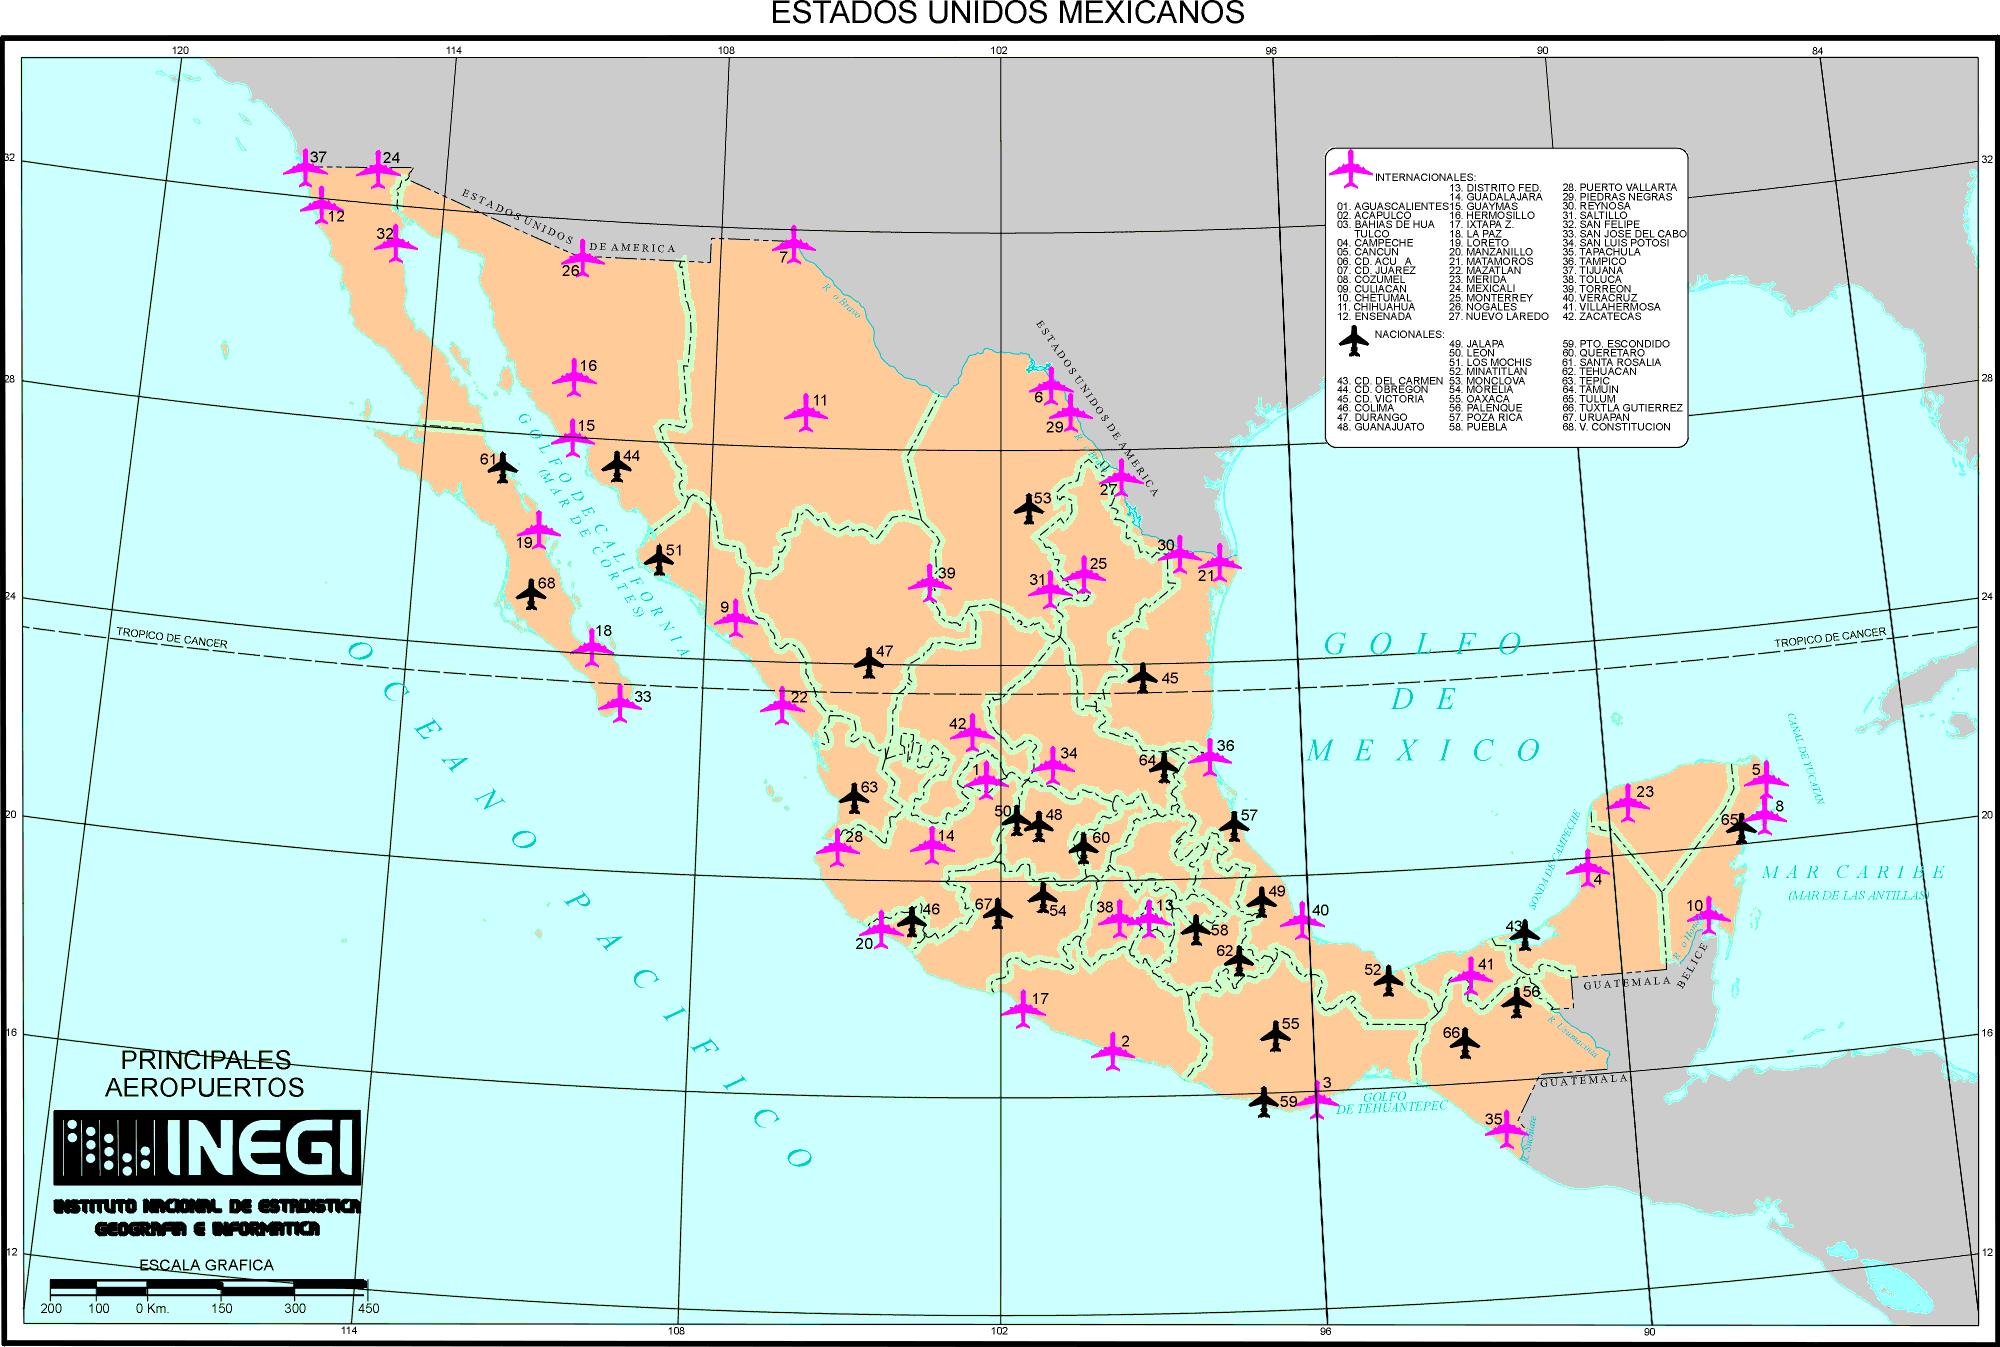 Mexico Maps Transports Geography And Tourist Maps Of Mexico In Americas